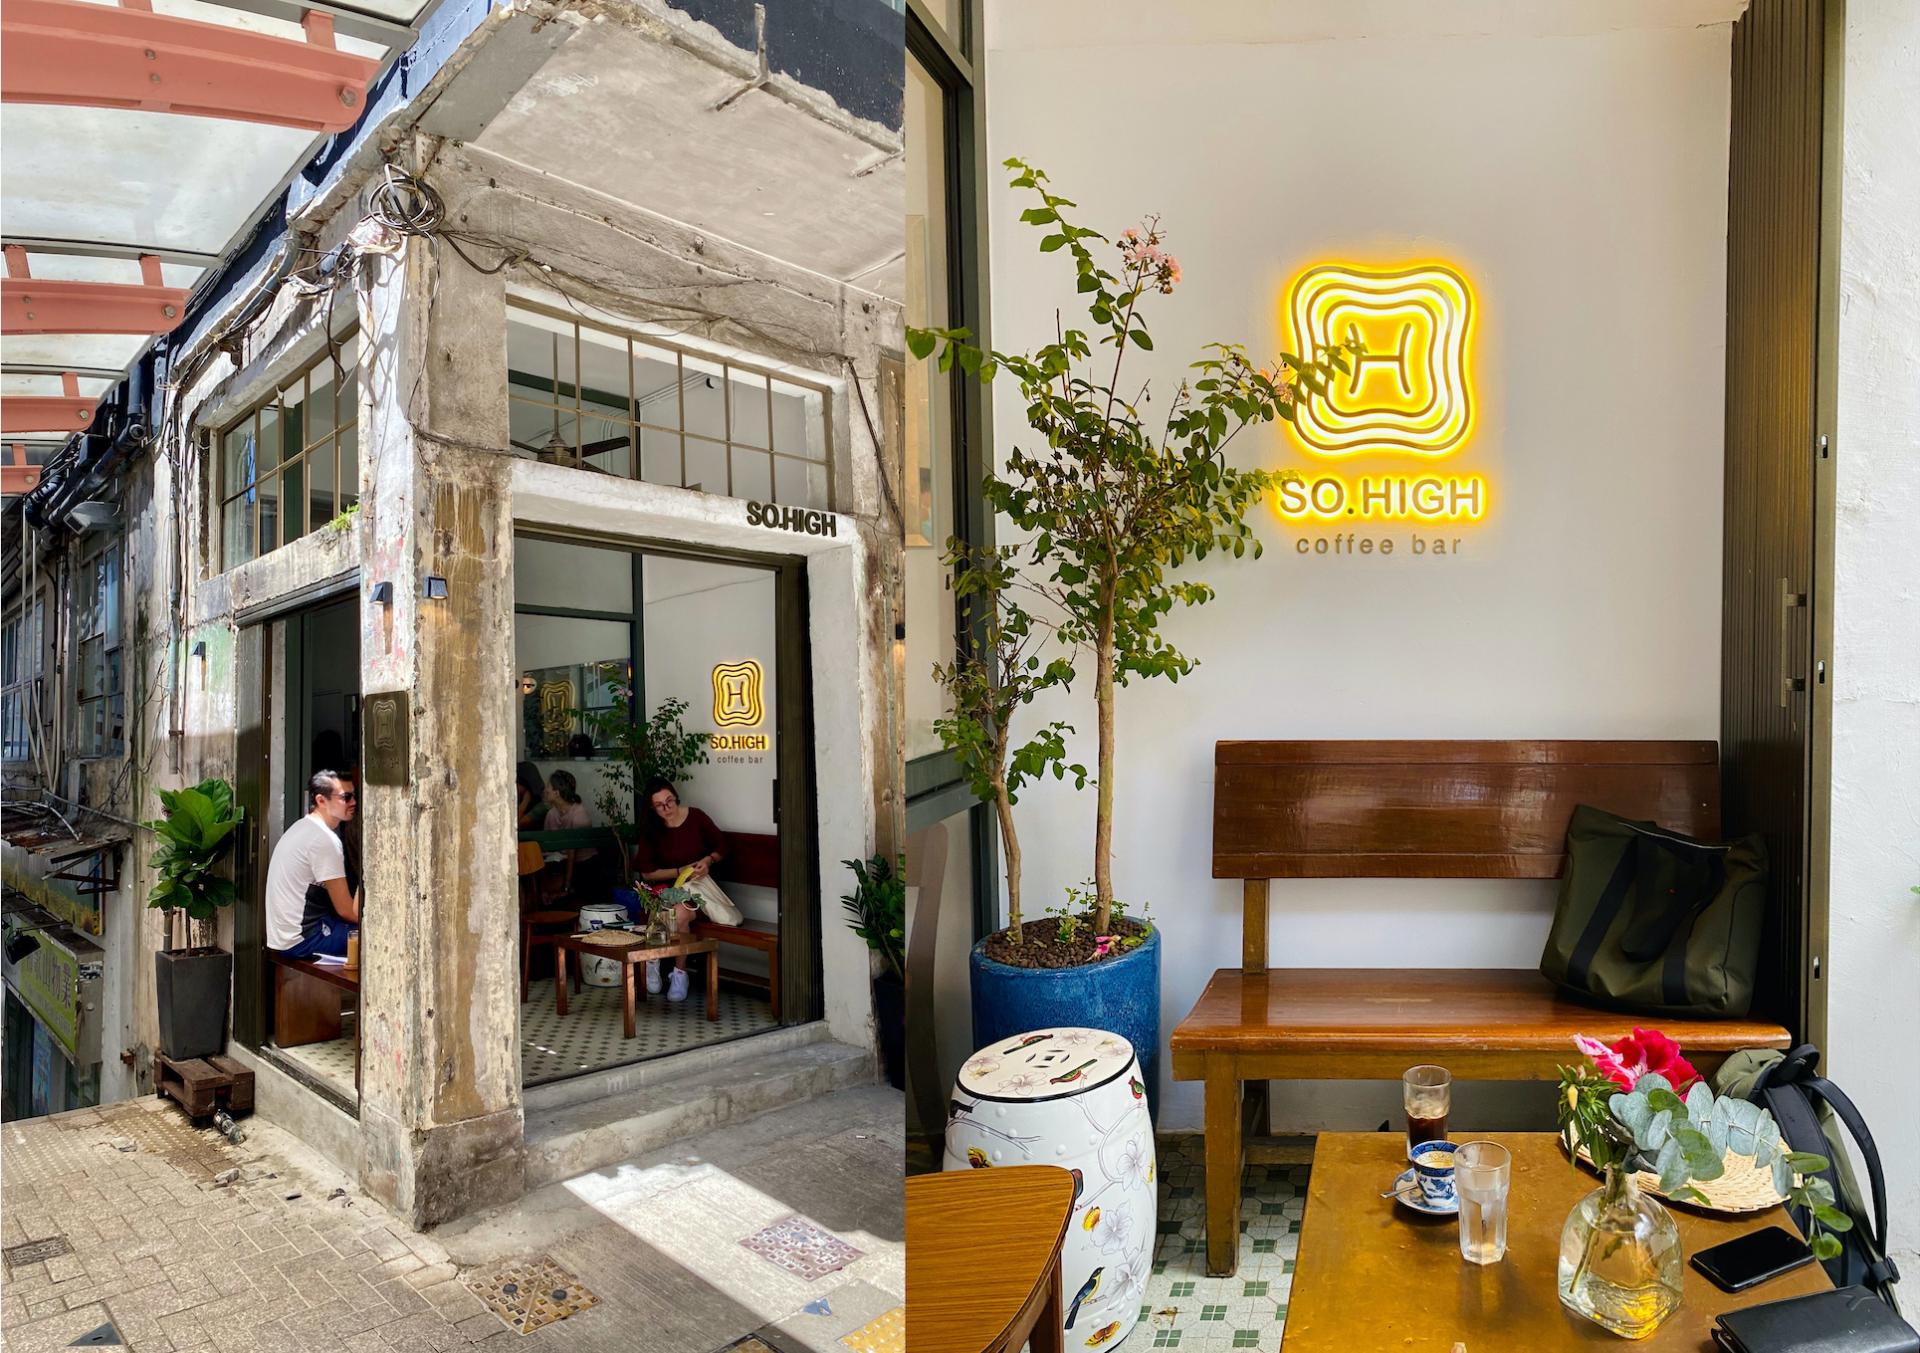 Coffee Culture: Celebrate the Good Old Days at So.High Coffee